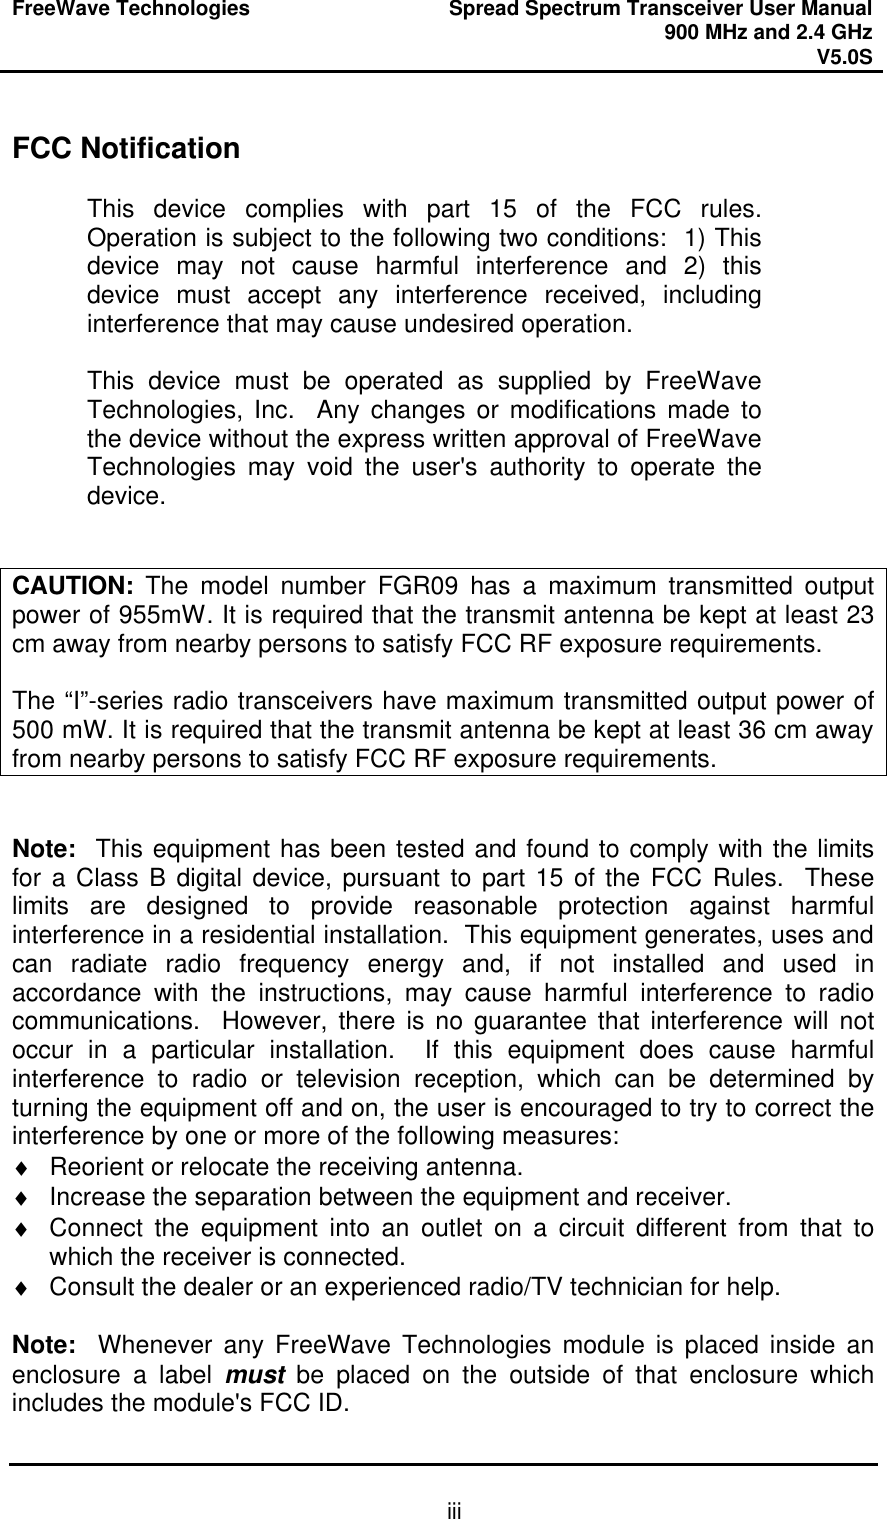 FreeWave Technologies Spread Spectrum Transceiver User Manual 900 MHz and 2.4 GHz V5.0S   iii FCC Notification  This device complies with part 15 of the FCC rules.  Operation is subject to the following two conditions:  1) This device may not cause harmful interference and 2) this device must accept any interference received, including interference that may cause undesired operation.  This device must be operated as supplied by FreeWave Technologies, Inc.  Any changes or modifications made to the device without the express written approval of FreeWave Technologies may void the user&apos;s authority to operate the device.   CAUTION: The model number FGR09 has a maximum transmitted output power of 955mW. It is required that the transmit antenna be kept at least 23 cm away from nearby persons to satisfy FCC RF exposure requirements.   The “I”-series radio transceivers have maximum transmitted output power of 500 mW. It is required that the transmit antenna be kept at least 36 cm away from nearby persons to satisfy FCC RF exposure requirements.   Note:  This equipment has been tested and found to comply with the limits for a Class B digital device, pursuant to part 15 of the FCC Rules.  These limits are designed to provide reasonable protection against harmful interference in a residential installation.  This equipment generates, uses and can radiate radio frequency energy and, if not installed and used in accordance with the instructions, may cause harmful interference to radio communications.  However, there is no guarantee that interference will not occur in a particular installation.  If this equipment does cause harmful interference to radio or television reception, which can be determined by turning the equipment off and on, the user is encouraged to try to correct the interference by one or more of the following measures: ♦ Reorient or relocate the receiving antenna. ♦ Increase the separation between the equipment and receiver. ♦ Connect the equipment into an outlet on a circuit different from that to which the receiver is connected. ♦ Consult the dealer or an experienced radio/TV technician for help.  Note:  Whenever any FreeWave Technologies module is placed inside an enclosure a label must be placed on the outside of that enclosure which includes the module&apos;s FCC ID. 